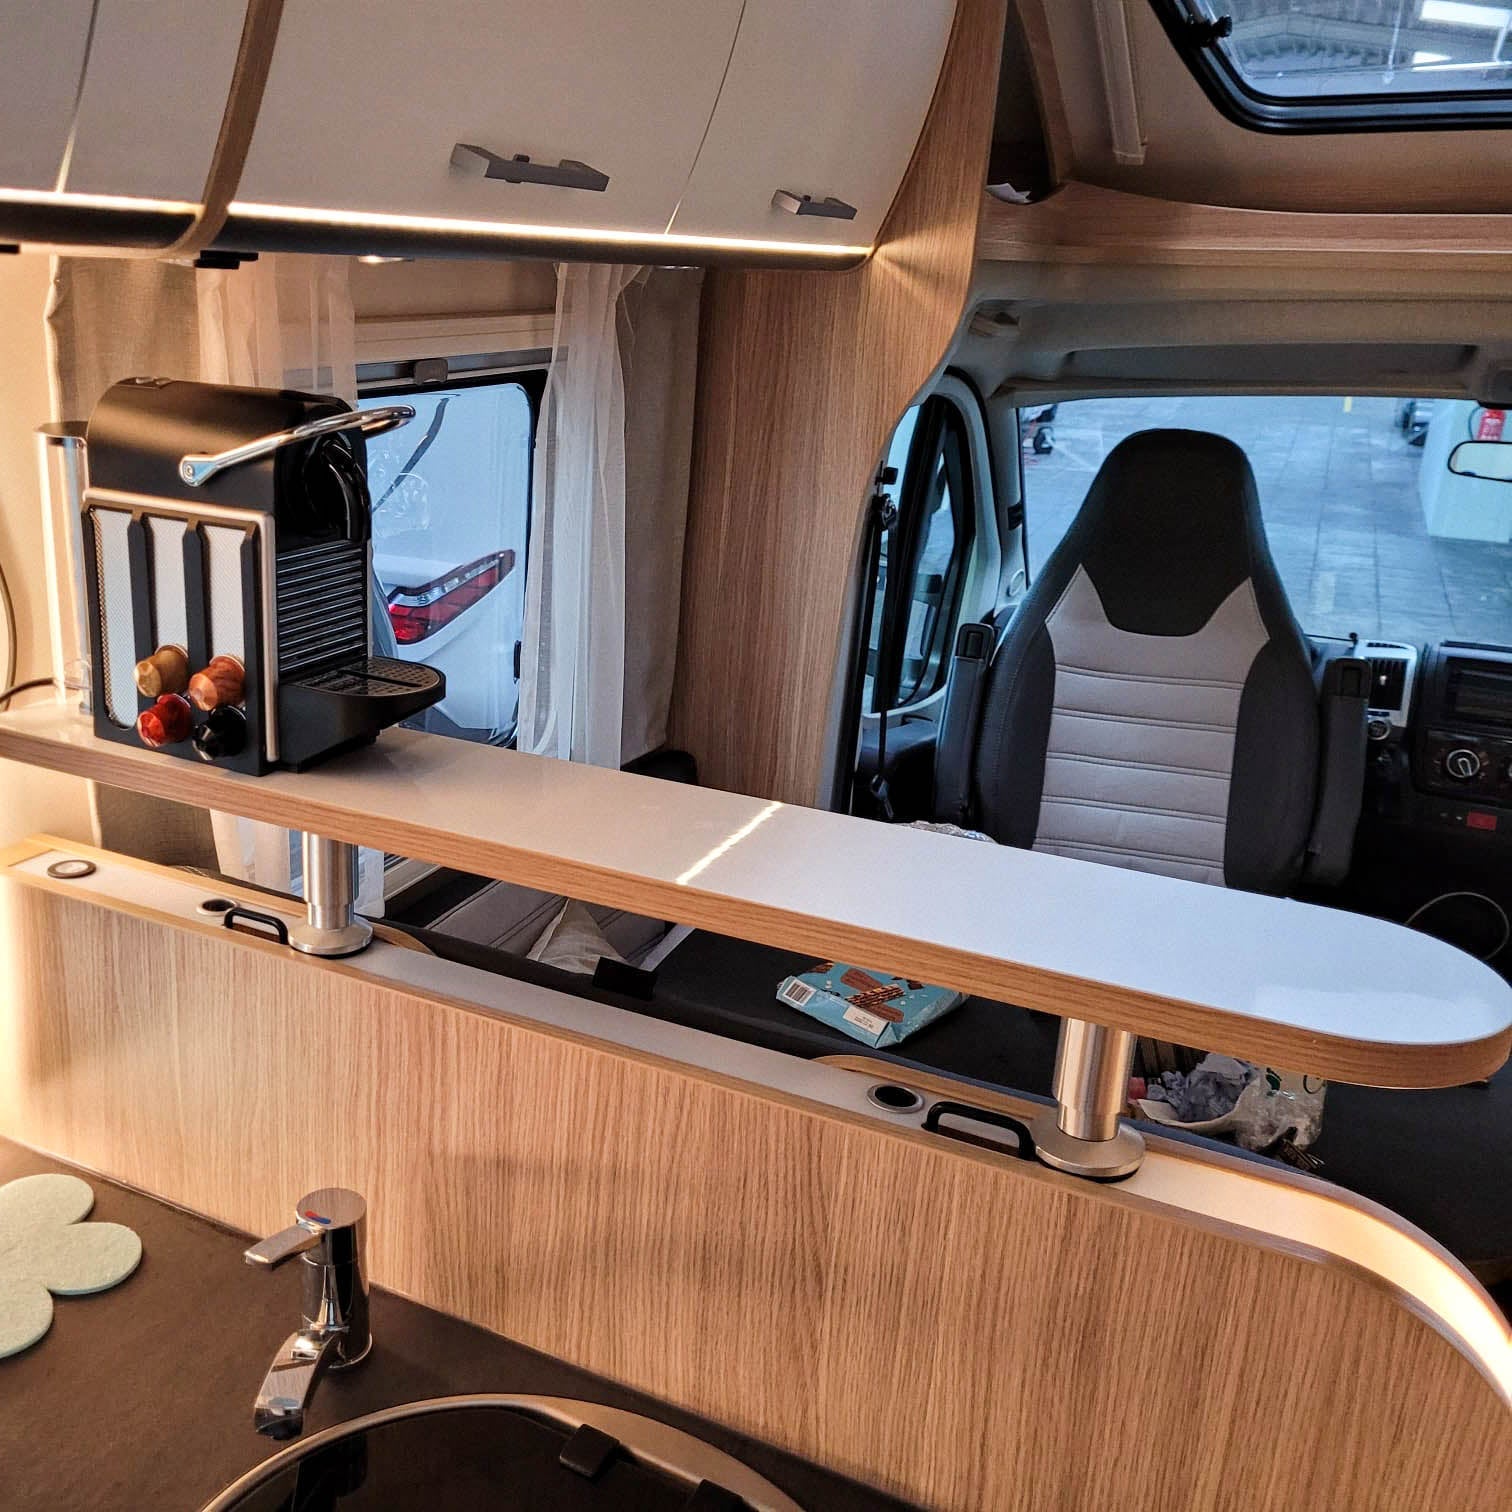 CamperBoards - Treat yourself to more storage space